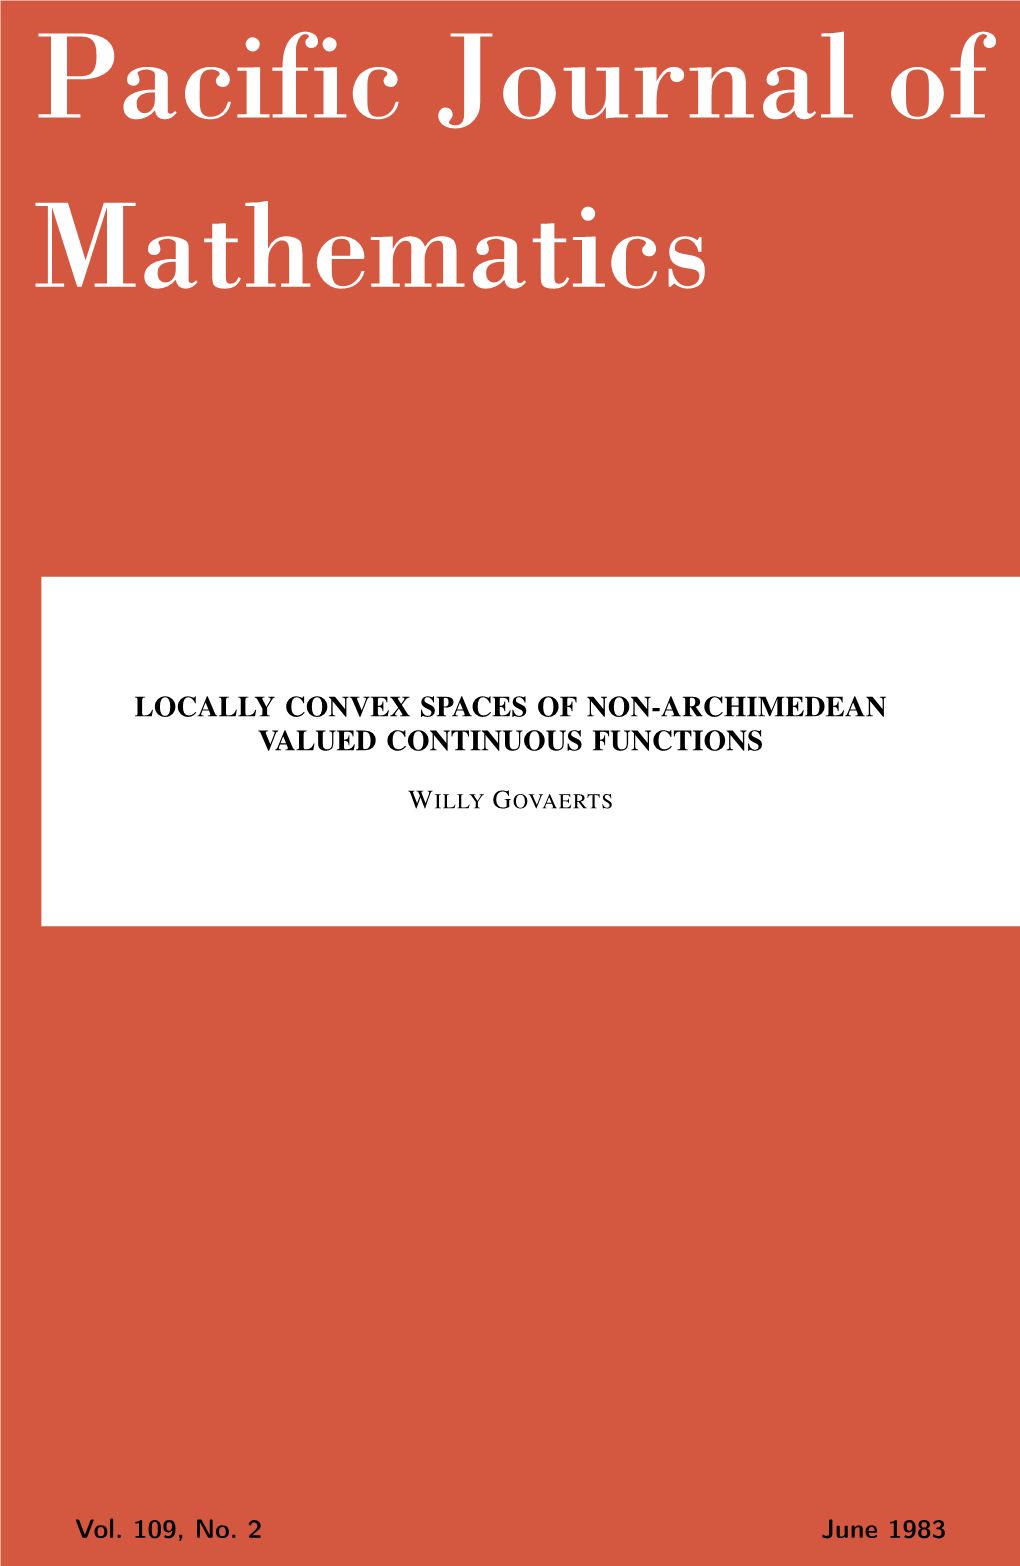 Locally Convex Spaces of Non-Archimedean Valued Continuous Functions